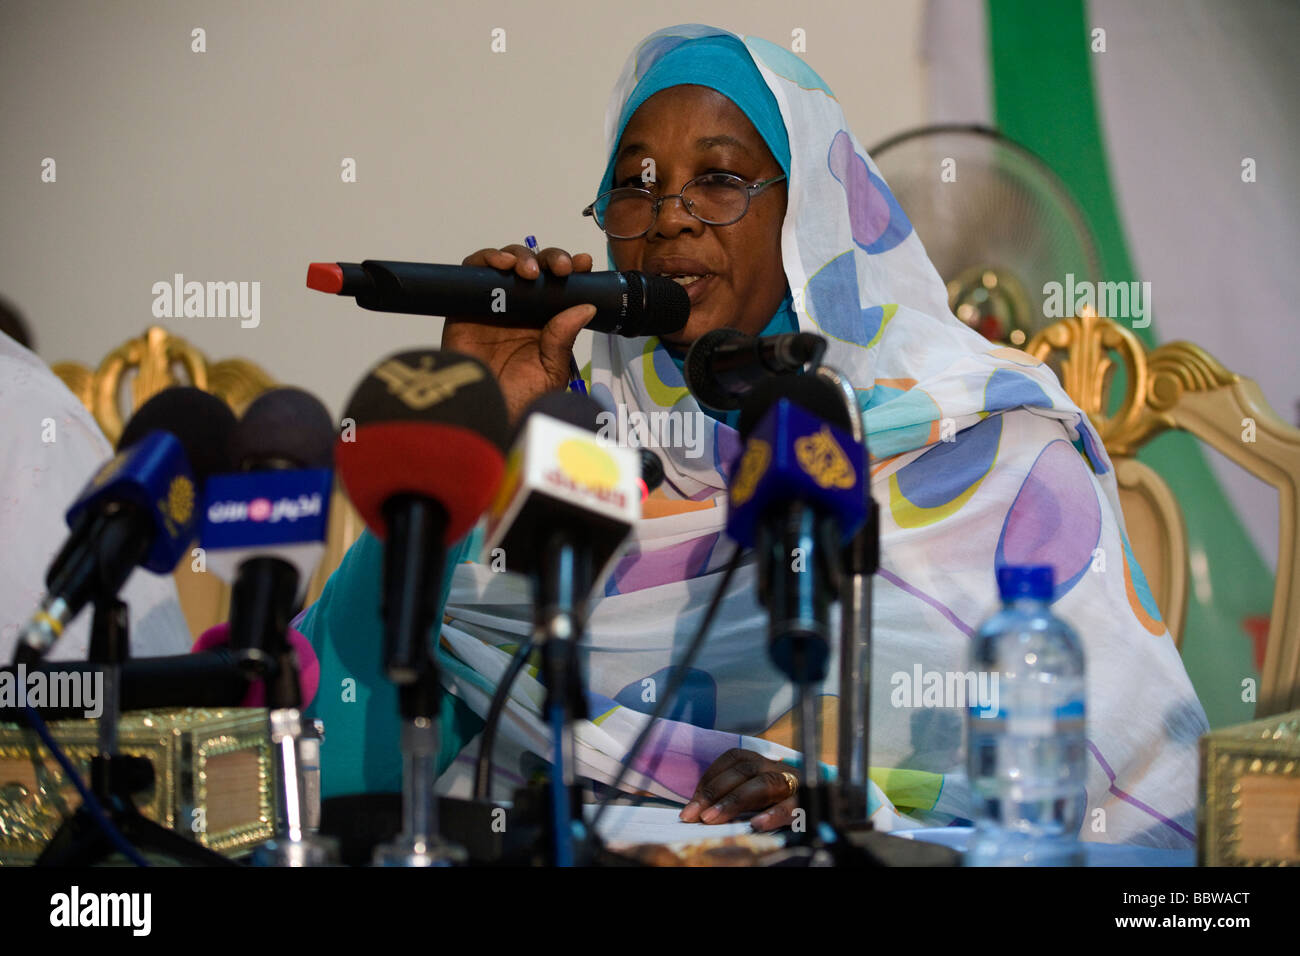 A lady delivers a speech during political conference in compound belonging to the Governor of North Darfur in Al Fasher Stock Photo